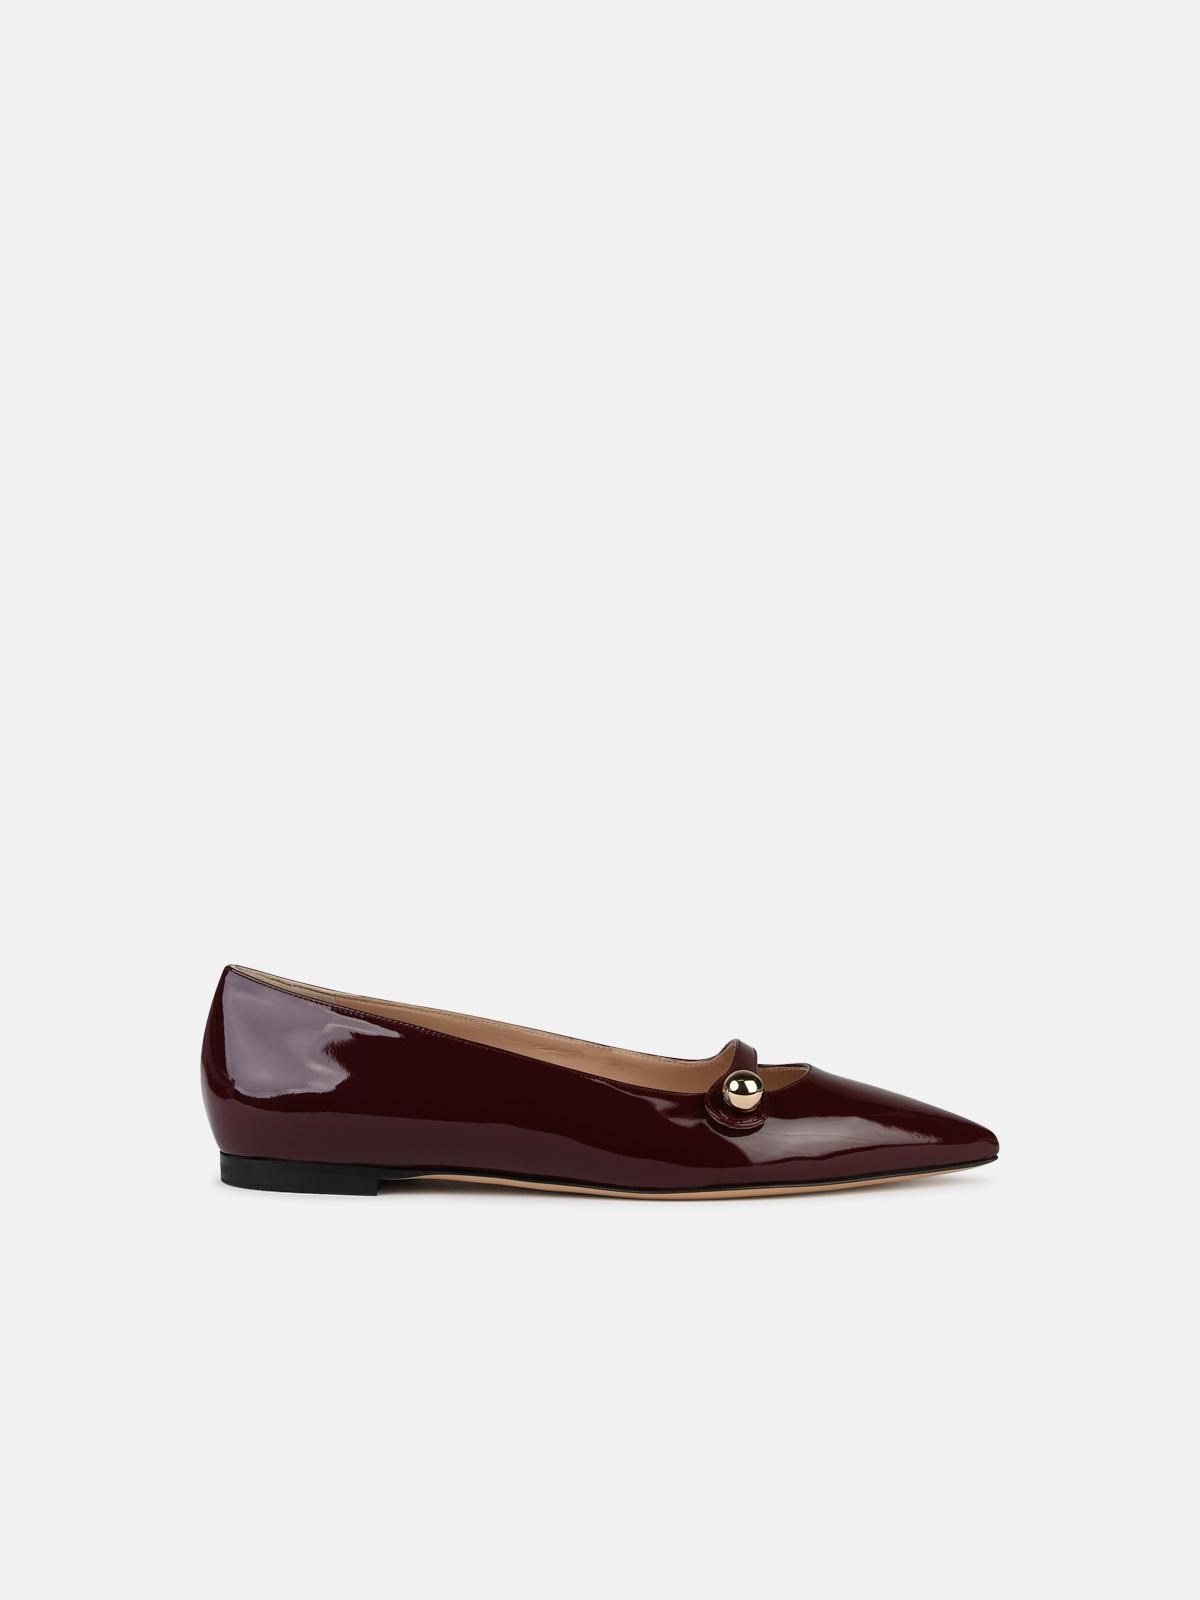 Casadei 'cleo' Burgundy Shiny Leather Ballet Flats In Brown